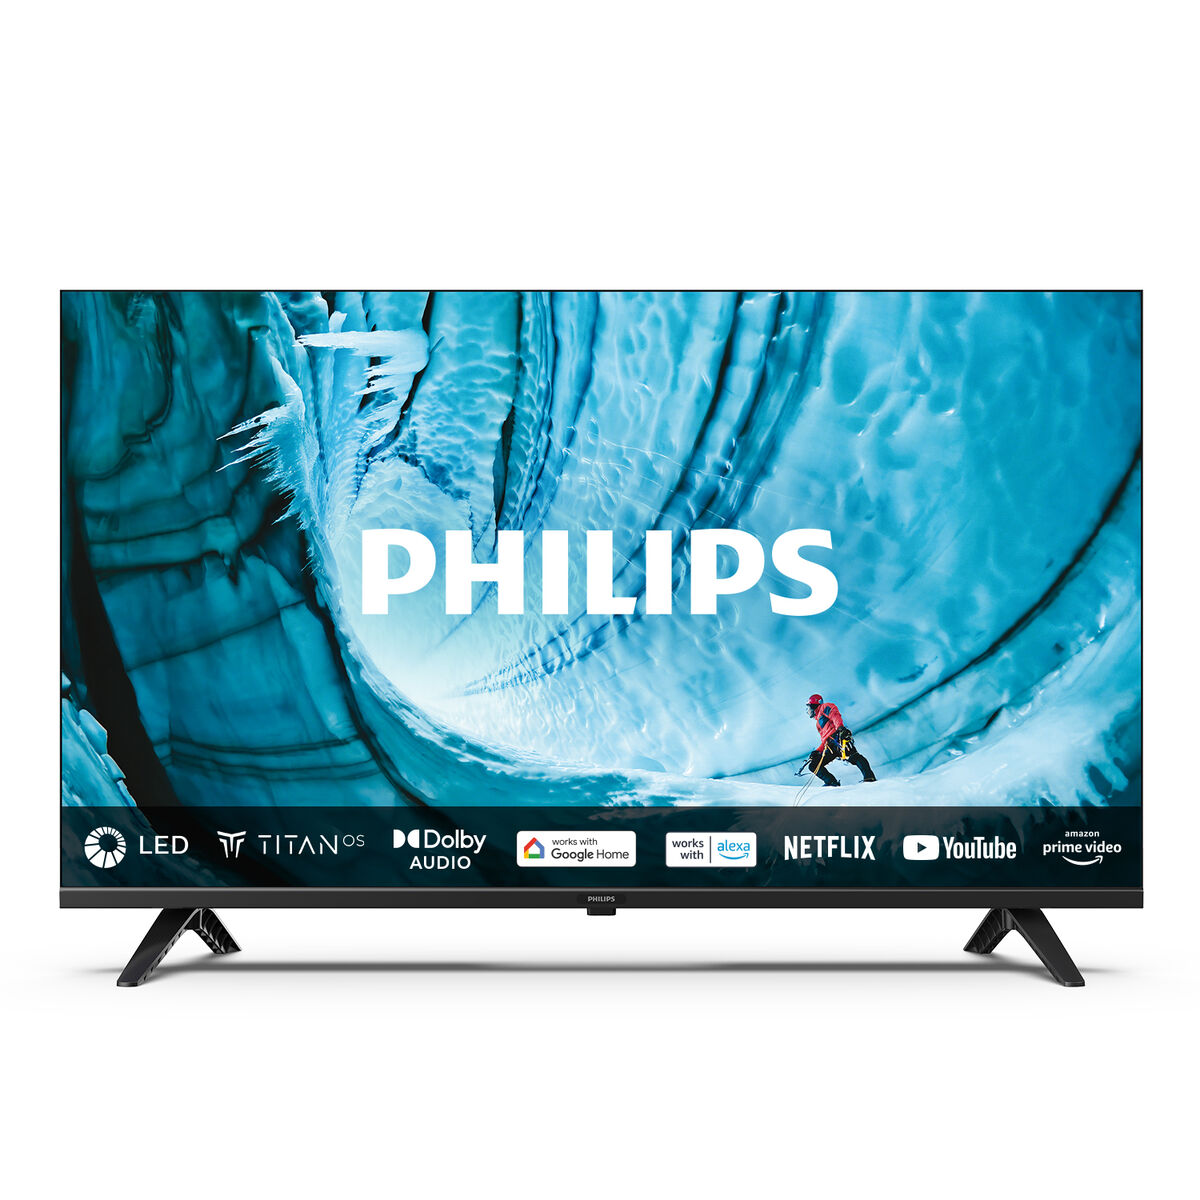 Smart TV Philips 32PHS6009 HD 32" LED HDR, Philips, Electronics, TV, Video and home cinema, smart-tv-philips-32phs6009-hd-32-led-hdr, Brand_Philips, category-reference-2609, category-reference-2625, category-reference-2931, category-reference-t-18805, category-reference-t-18827, category-reference-t-19653, cinema and television, Condition_NEW, entertainment, Price_200 - 300, RiotNook